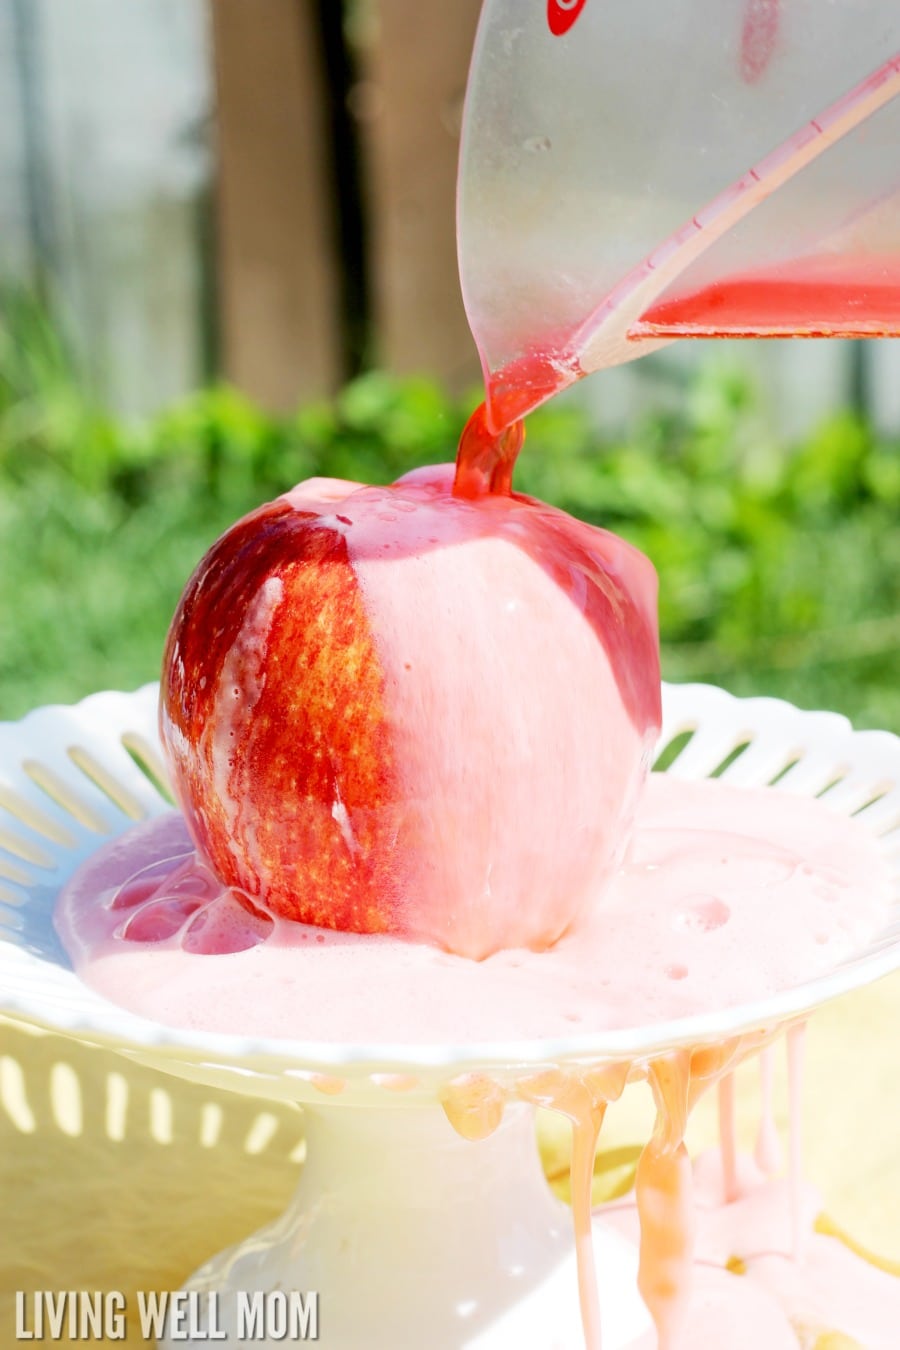 Looking for fall fun with the kids that includes a little science? This fun STEM project allows you to create a foamy “eruption” using supplies found in your kitchen. This isn’t your average volcano - these are APPLE Volcanoes! Get the easy how-to here: